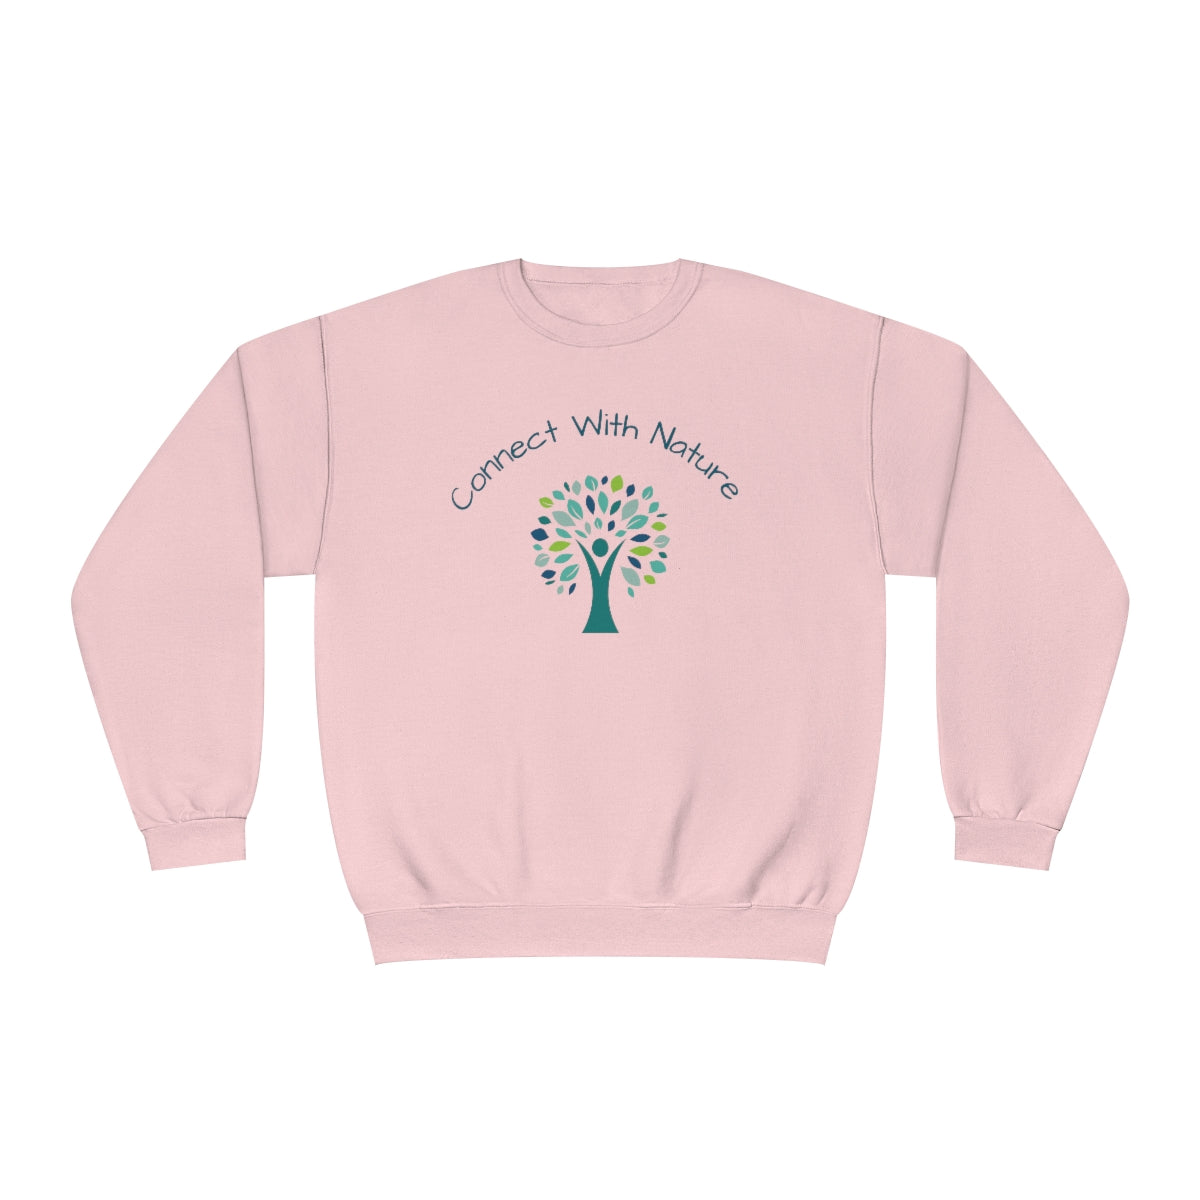 Connect with Nature Bohemian Fleece Sweat shirt Classic Pink